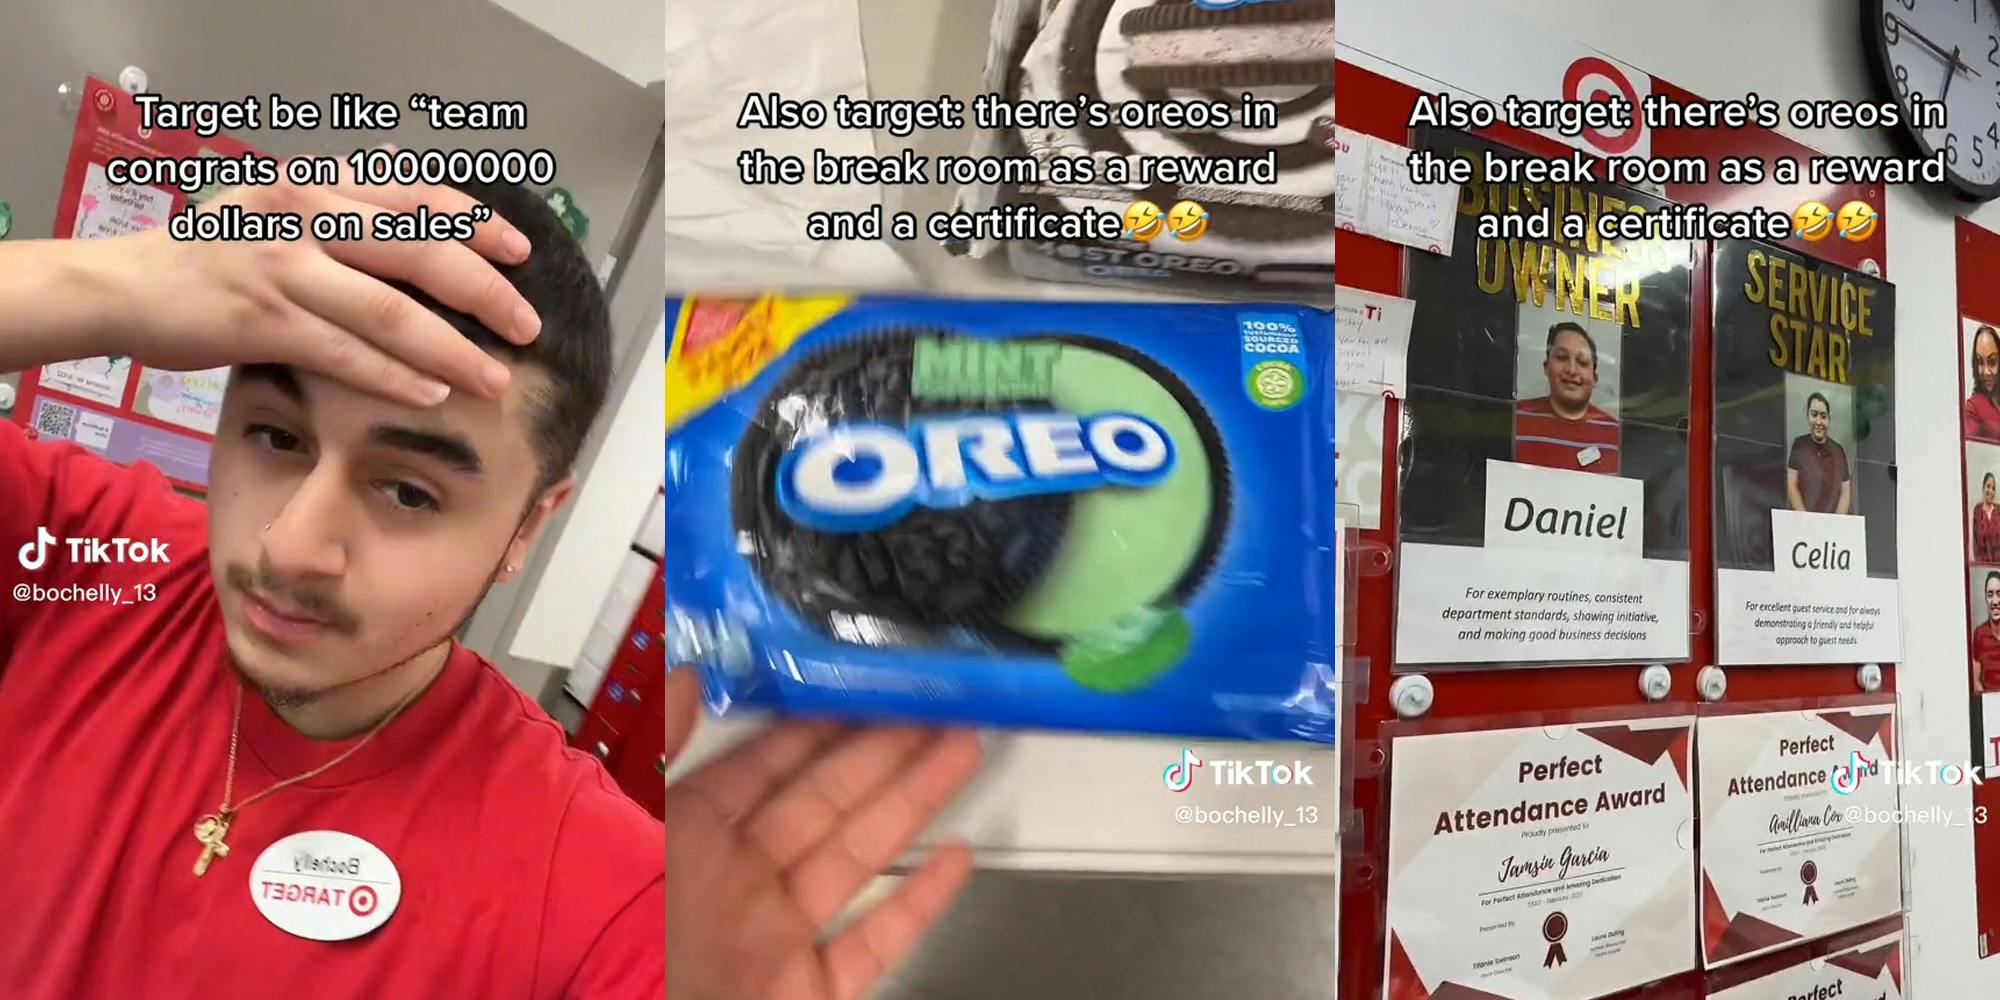 target employee with oreo's and certificates